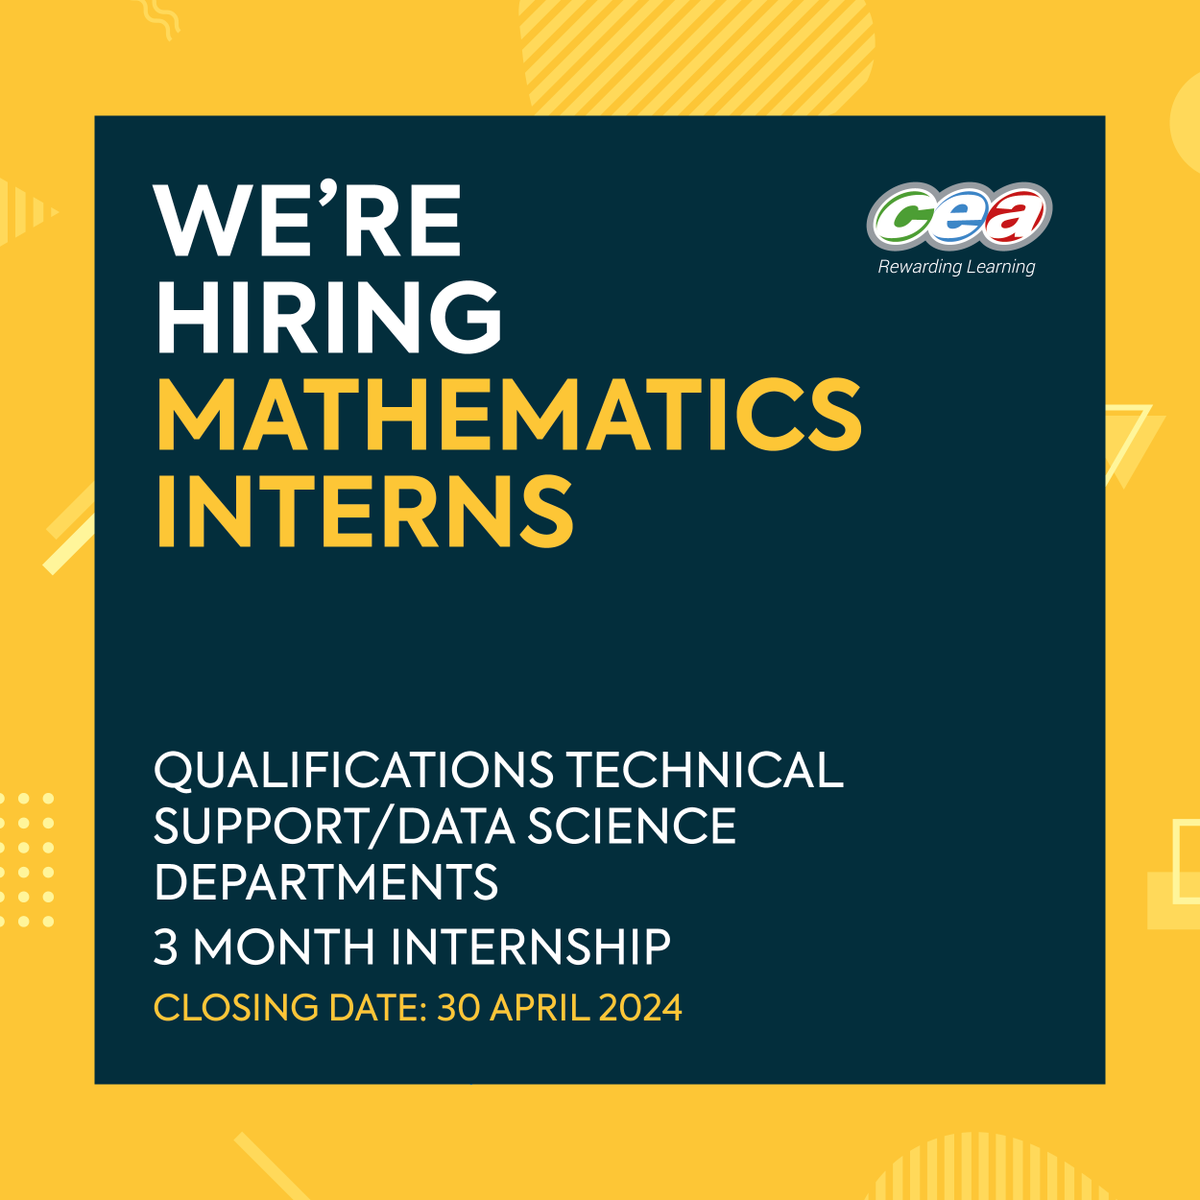 Are you working towards an Undergraduate/Master’s degree in Mathematics, Statistics or Data Science and want to gain a valuable insight into the work of Northern Ireland’s leading awarding body? If so, click on the link below to apply to join our team. 🔗ow.ly/Hqy650RhXTR